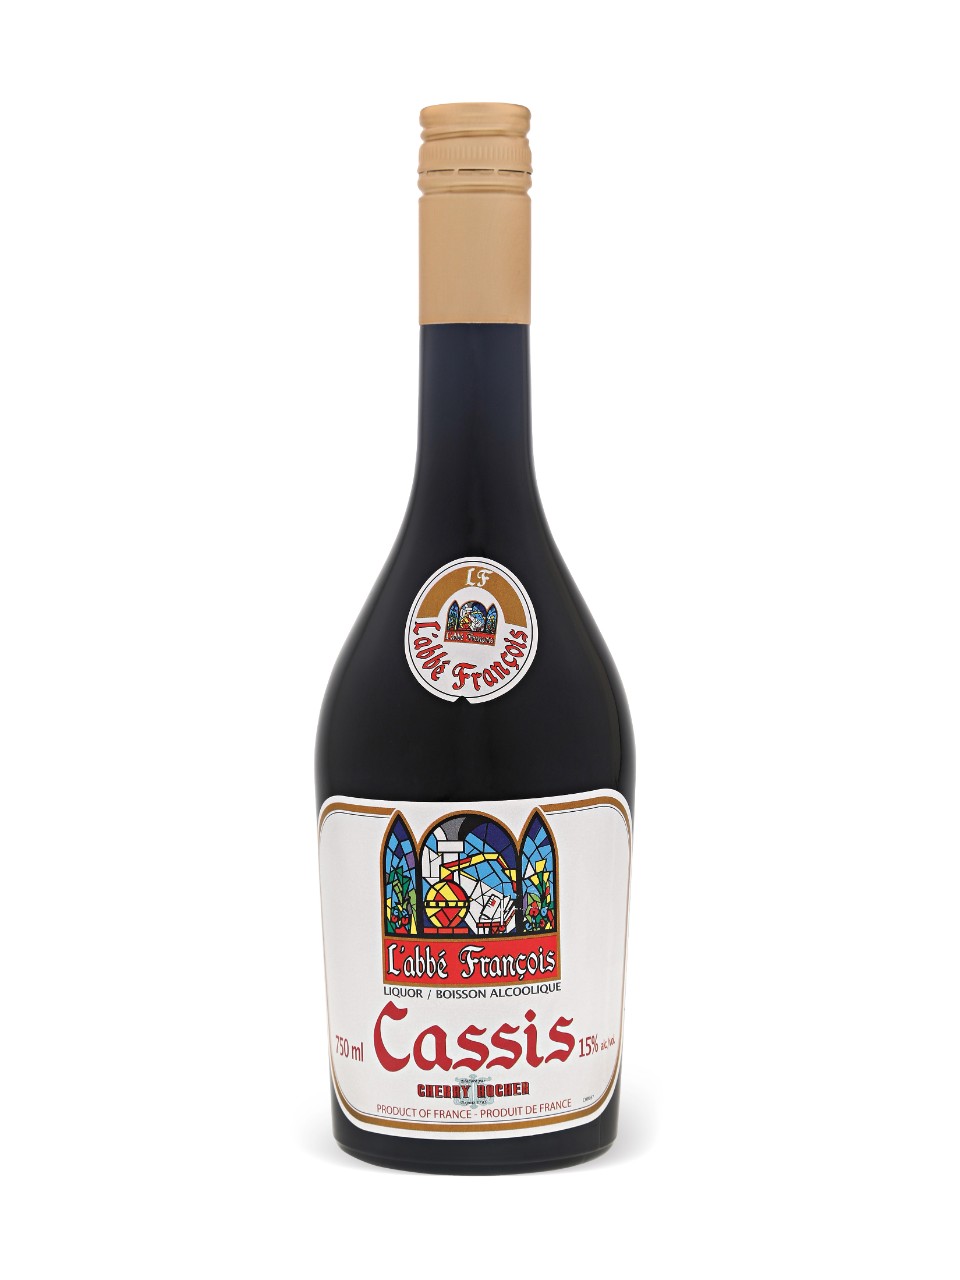 Labbe Francois Cassis from LCBO